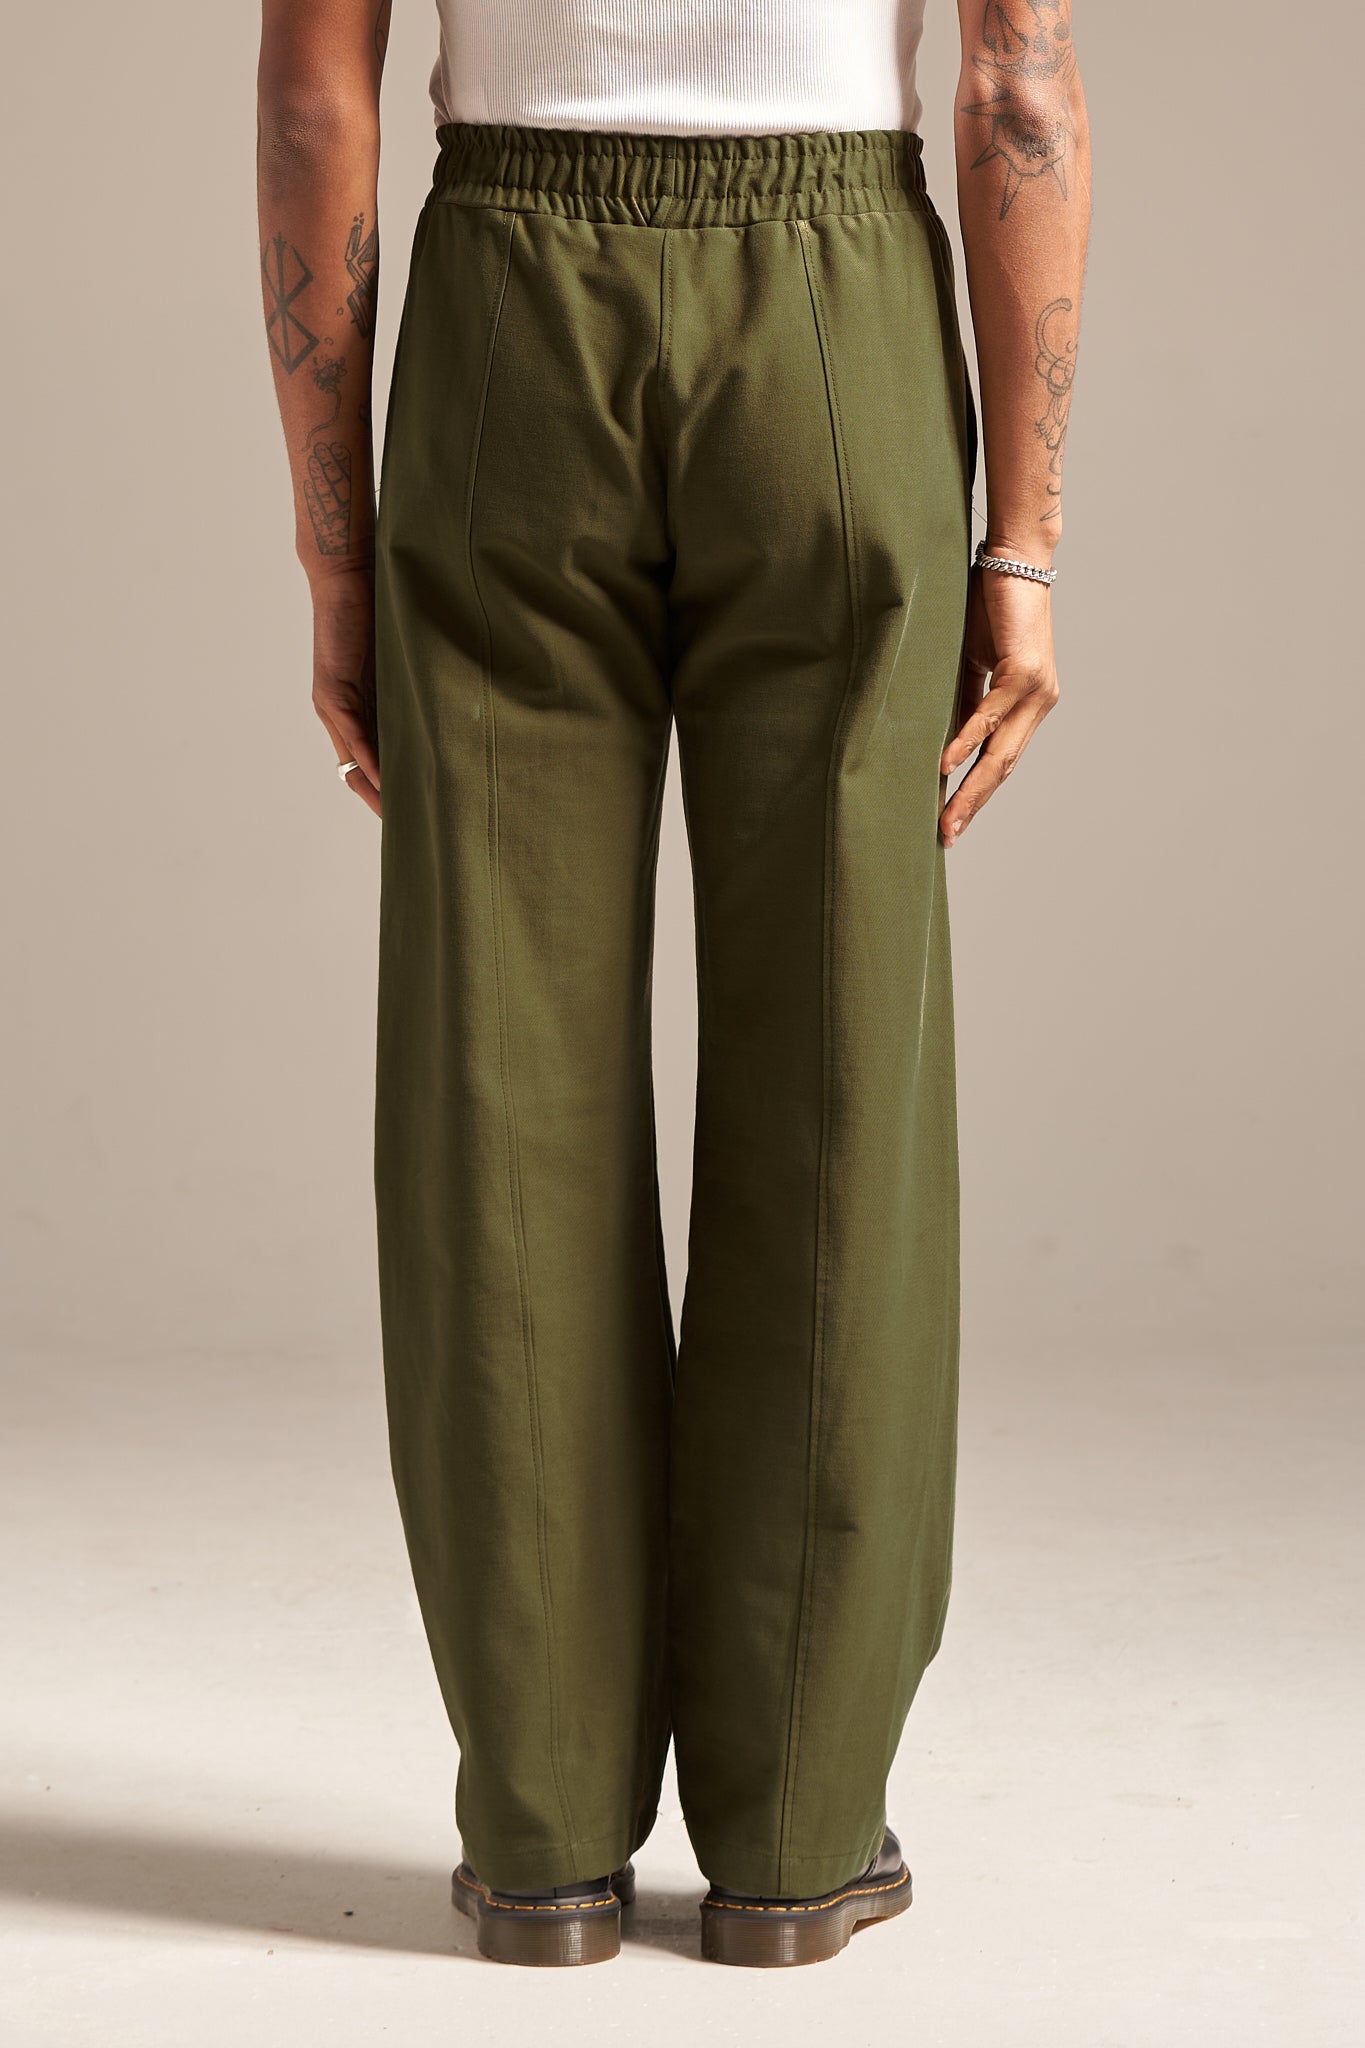 The Olive '23 Staple Pant